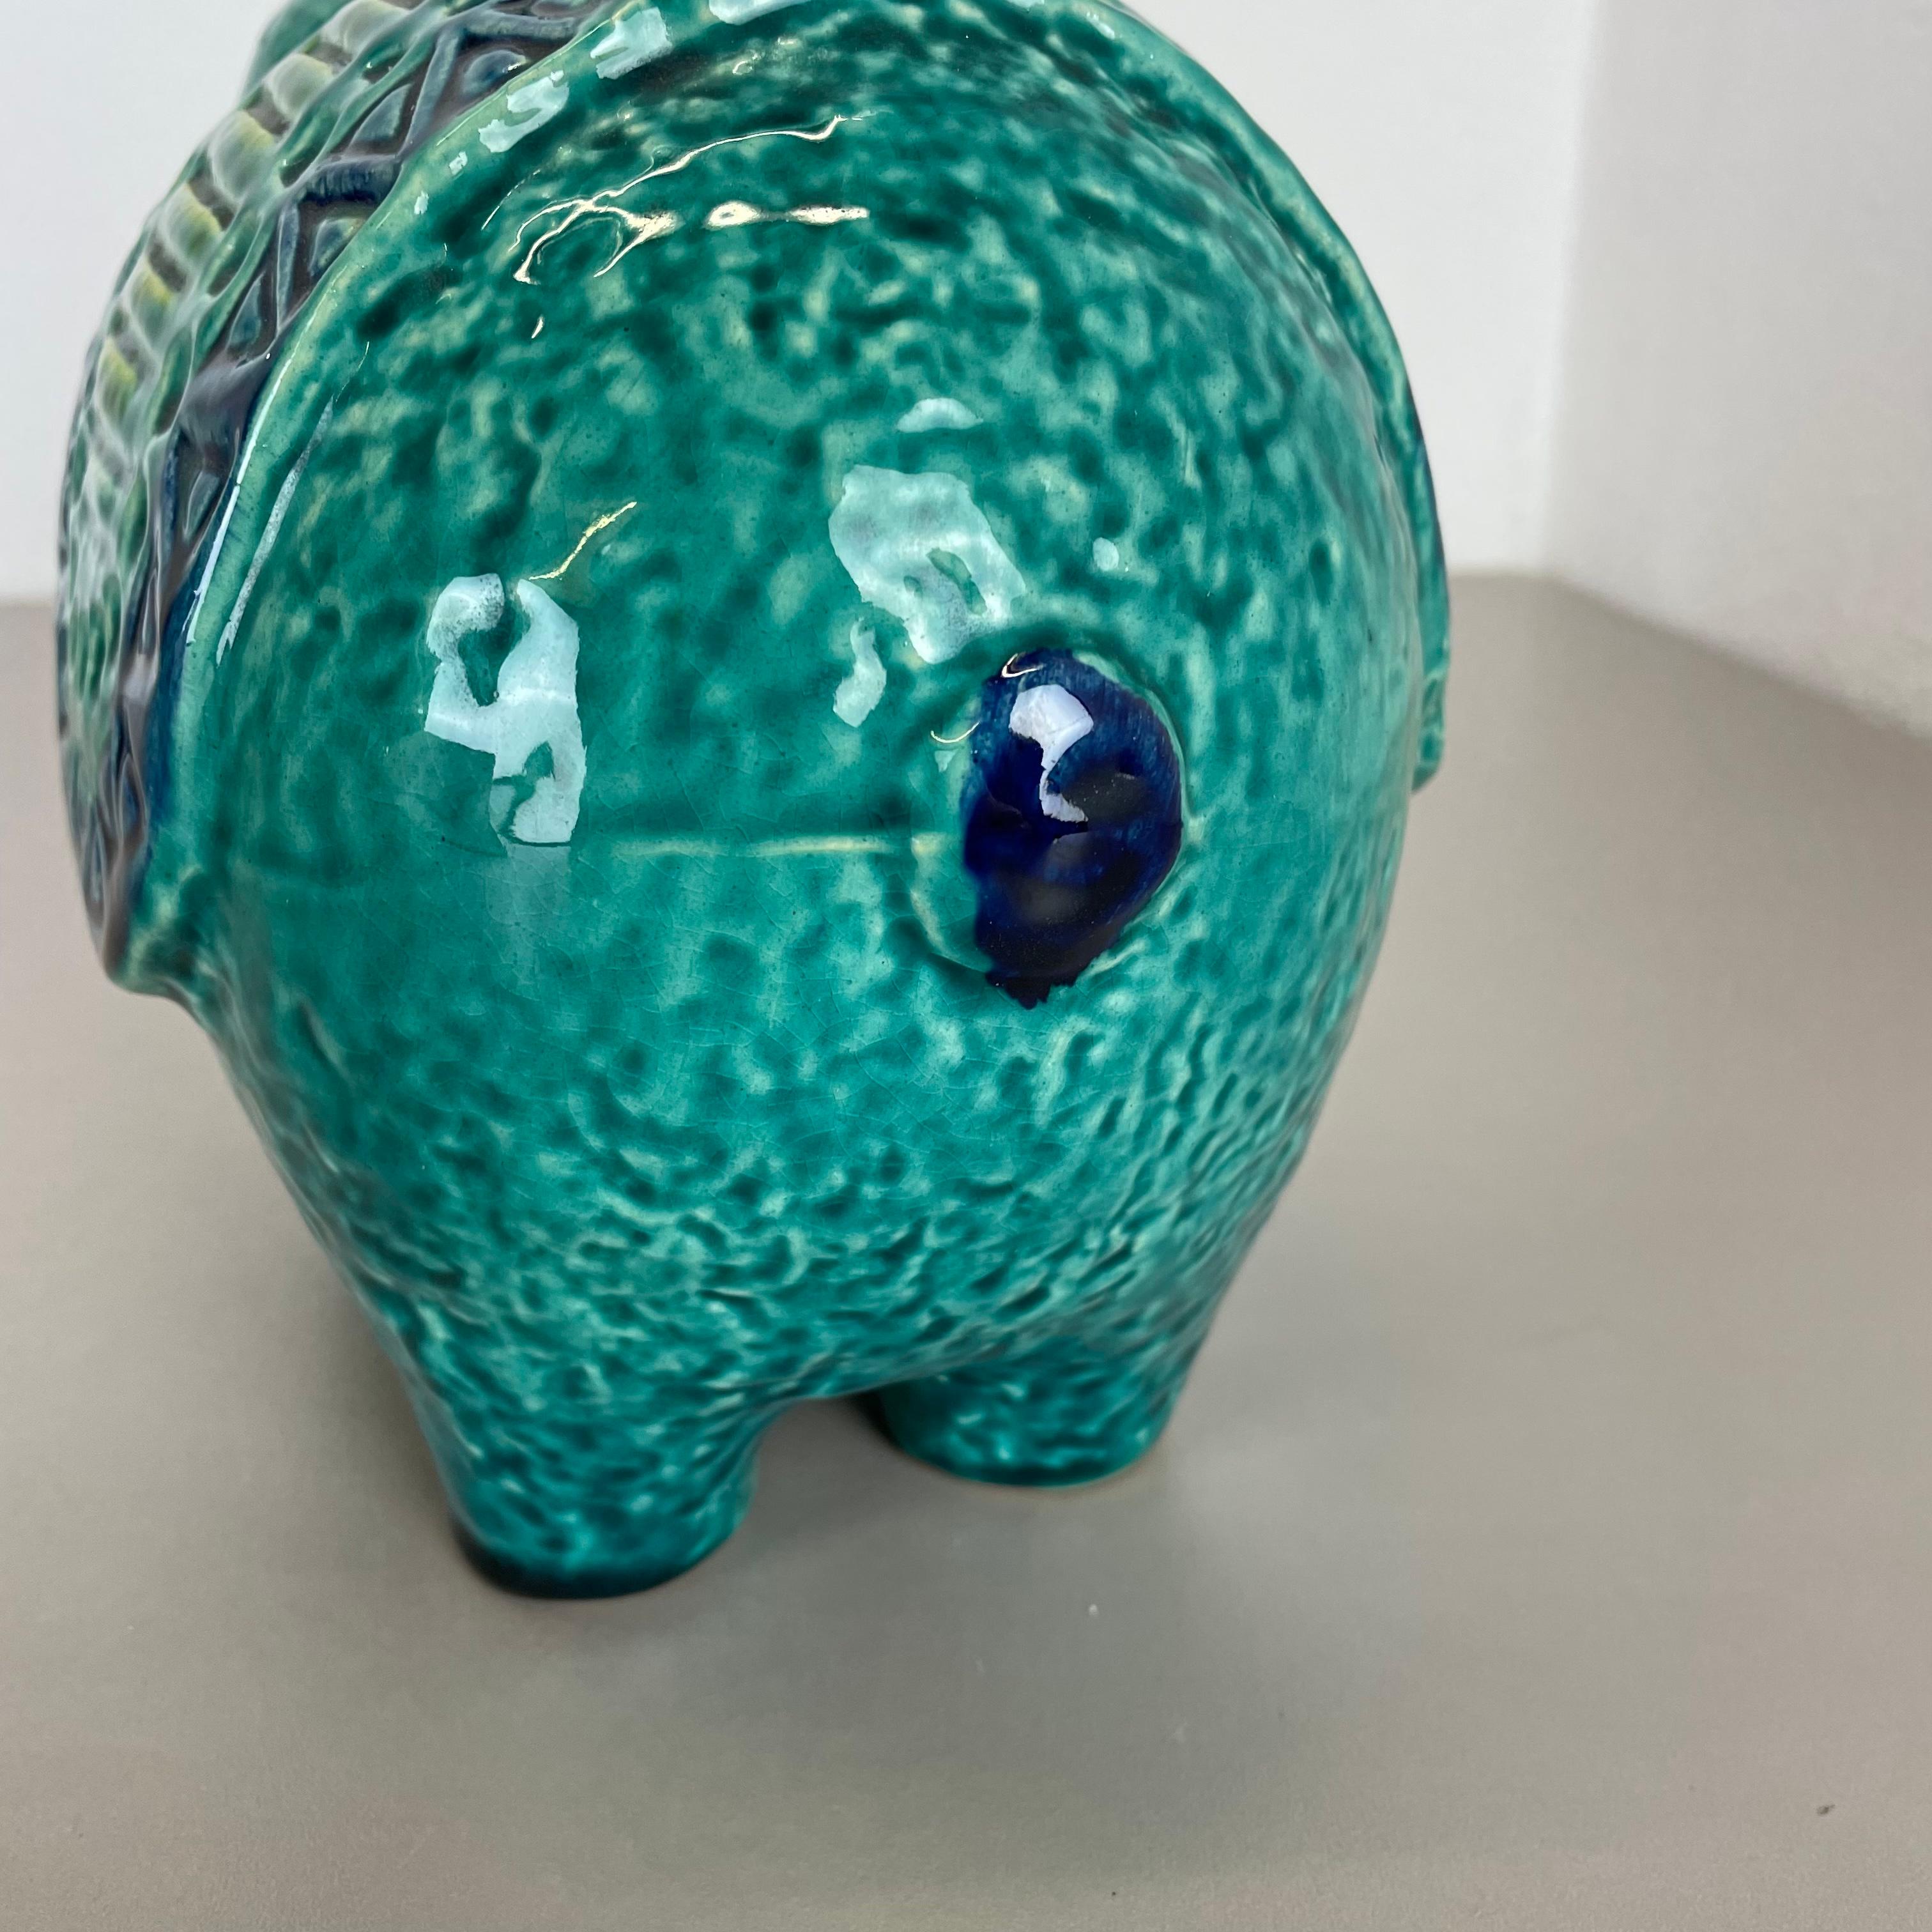 Colorful Fat Lava Pottery Swine Money Box Object by Bay Ceramics, Germany, 1970s For Sale 5